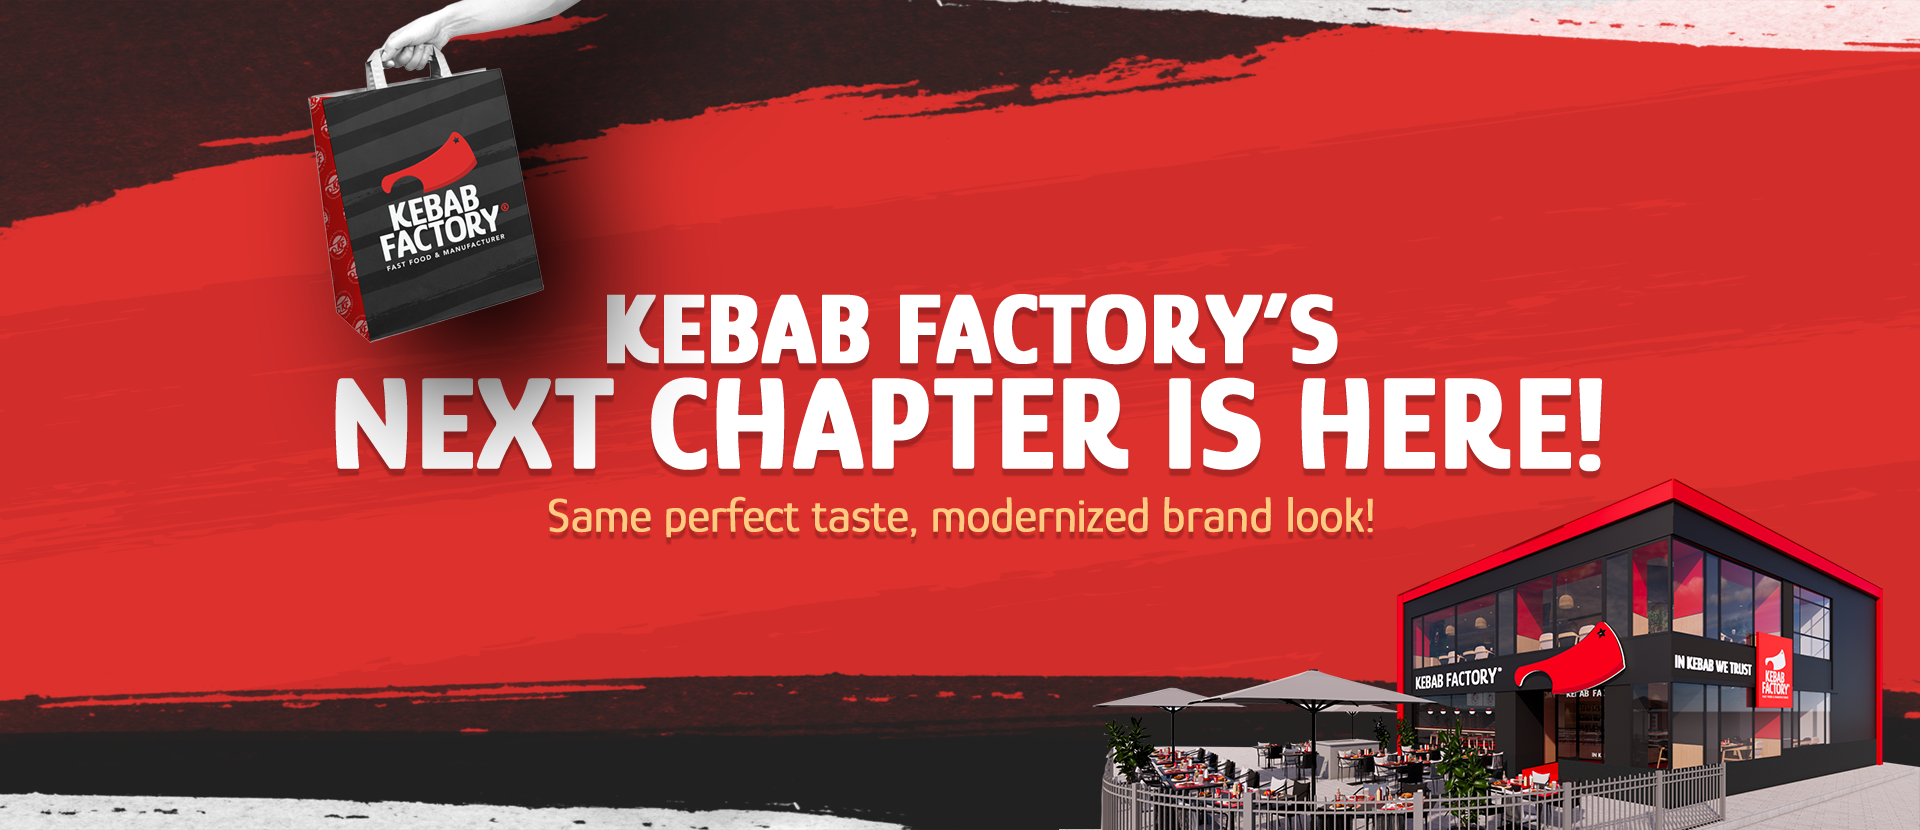 kebab factorys next chapter is here